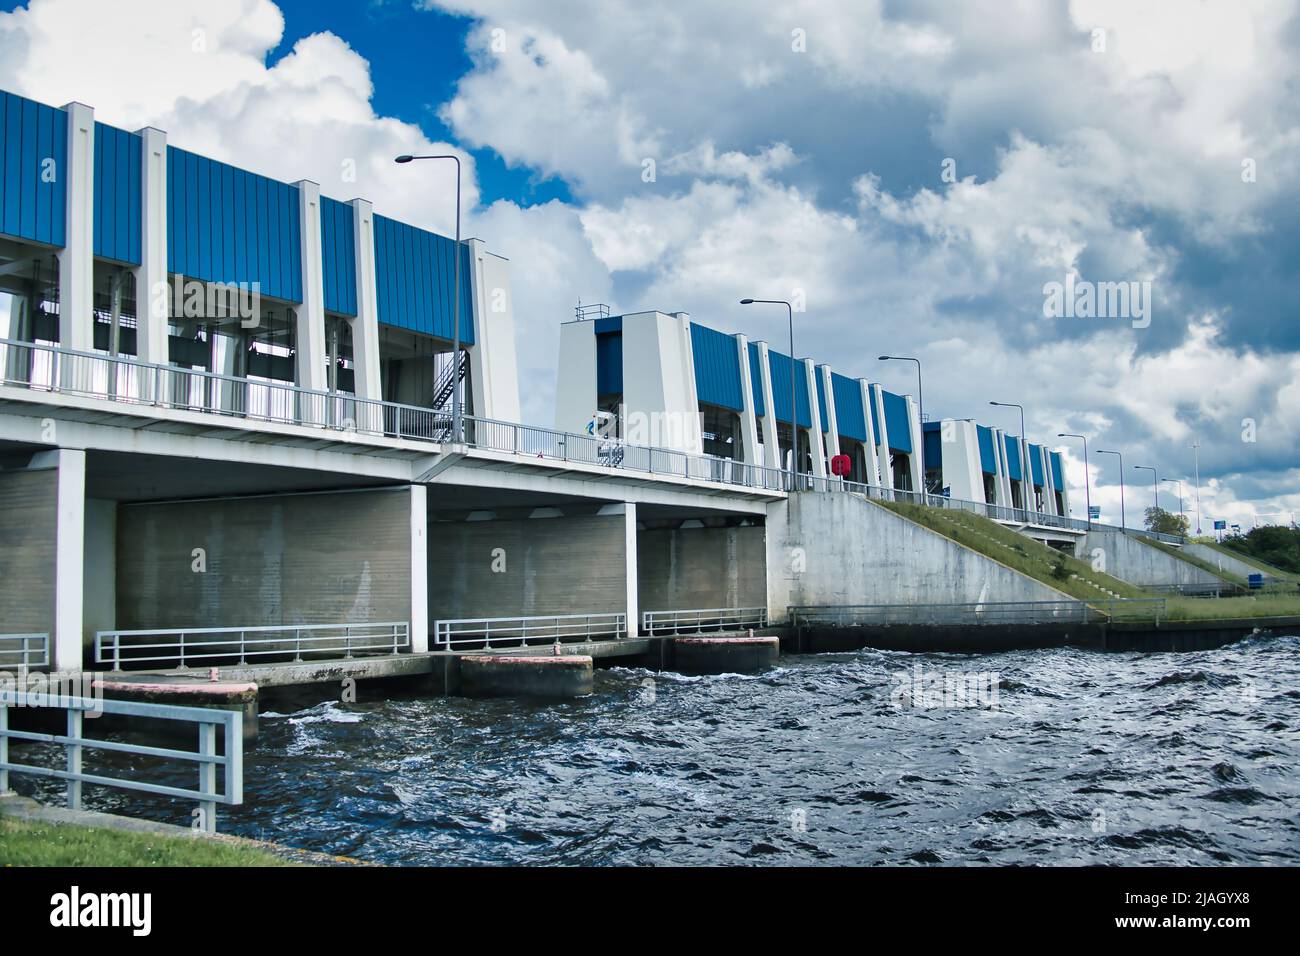 The Cleveringsluizen, drainage locks and sluices that are an essential part in the water management in the north of the Netherlands, Lauwersoog. Stock Photo